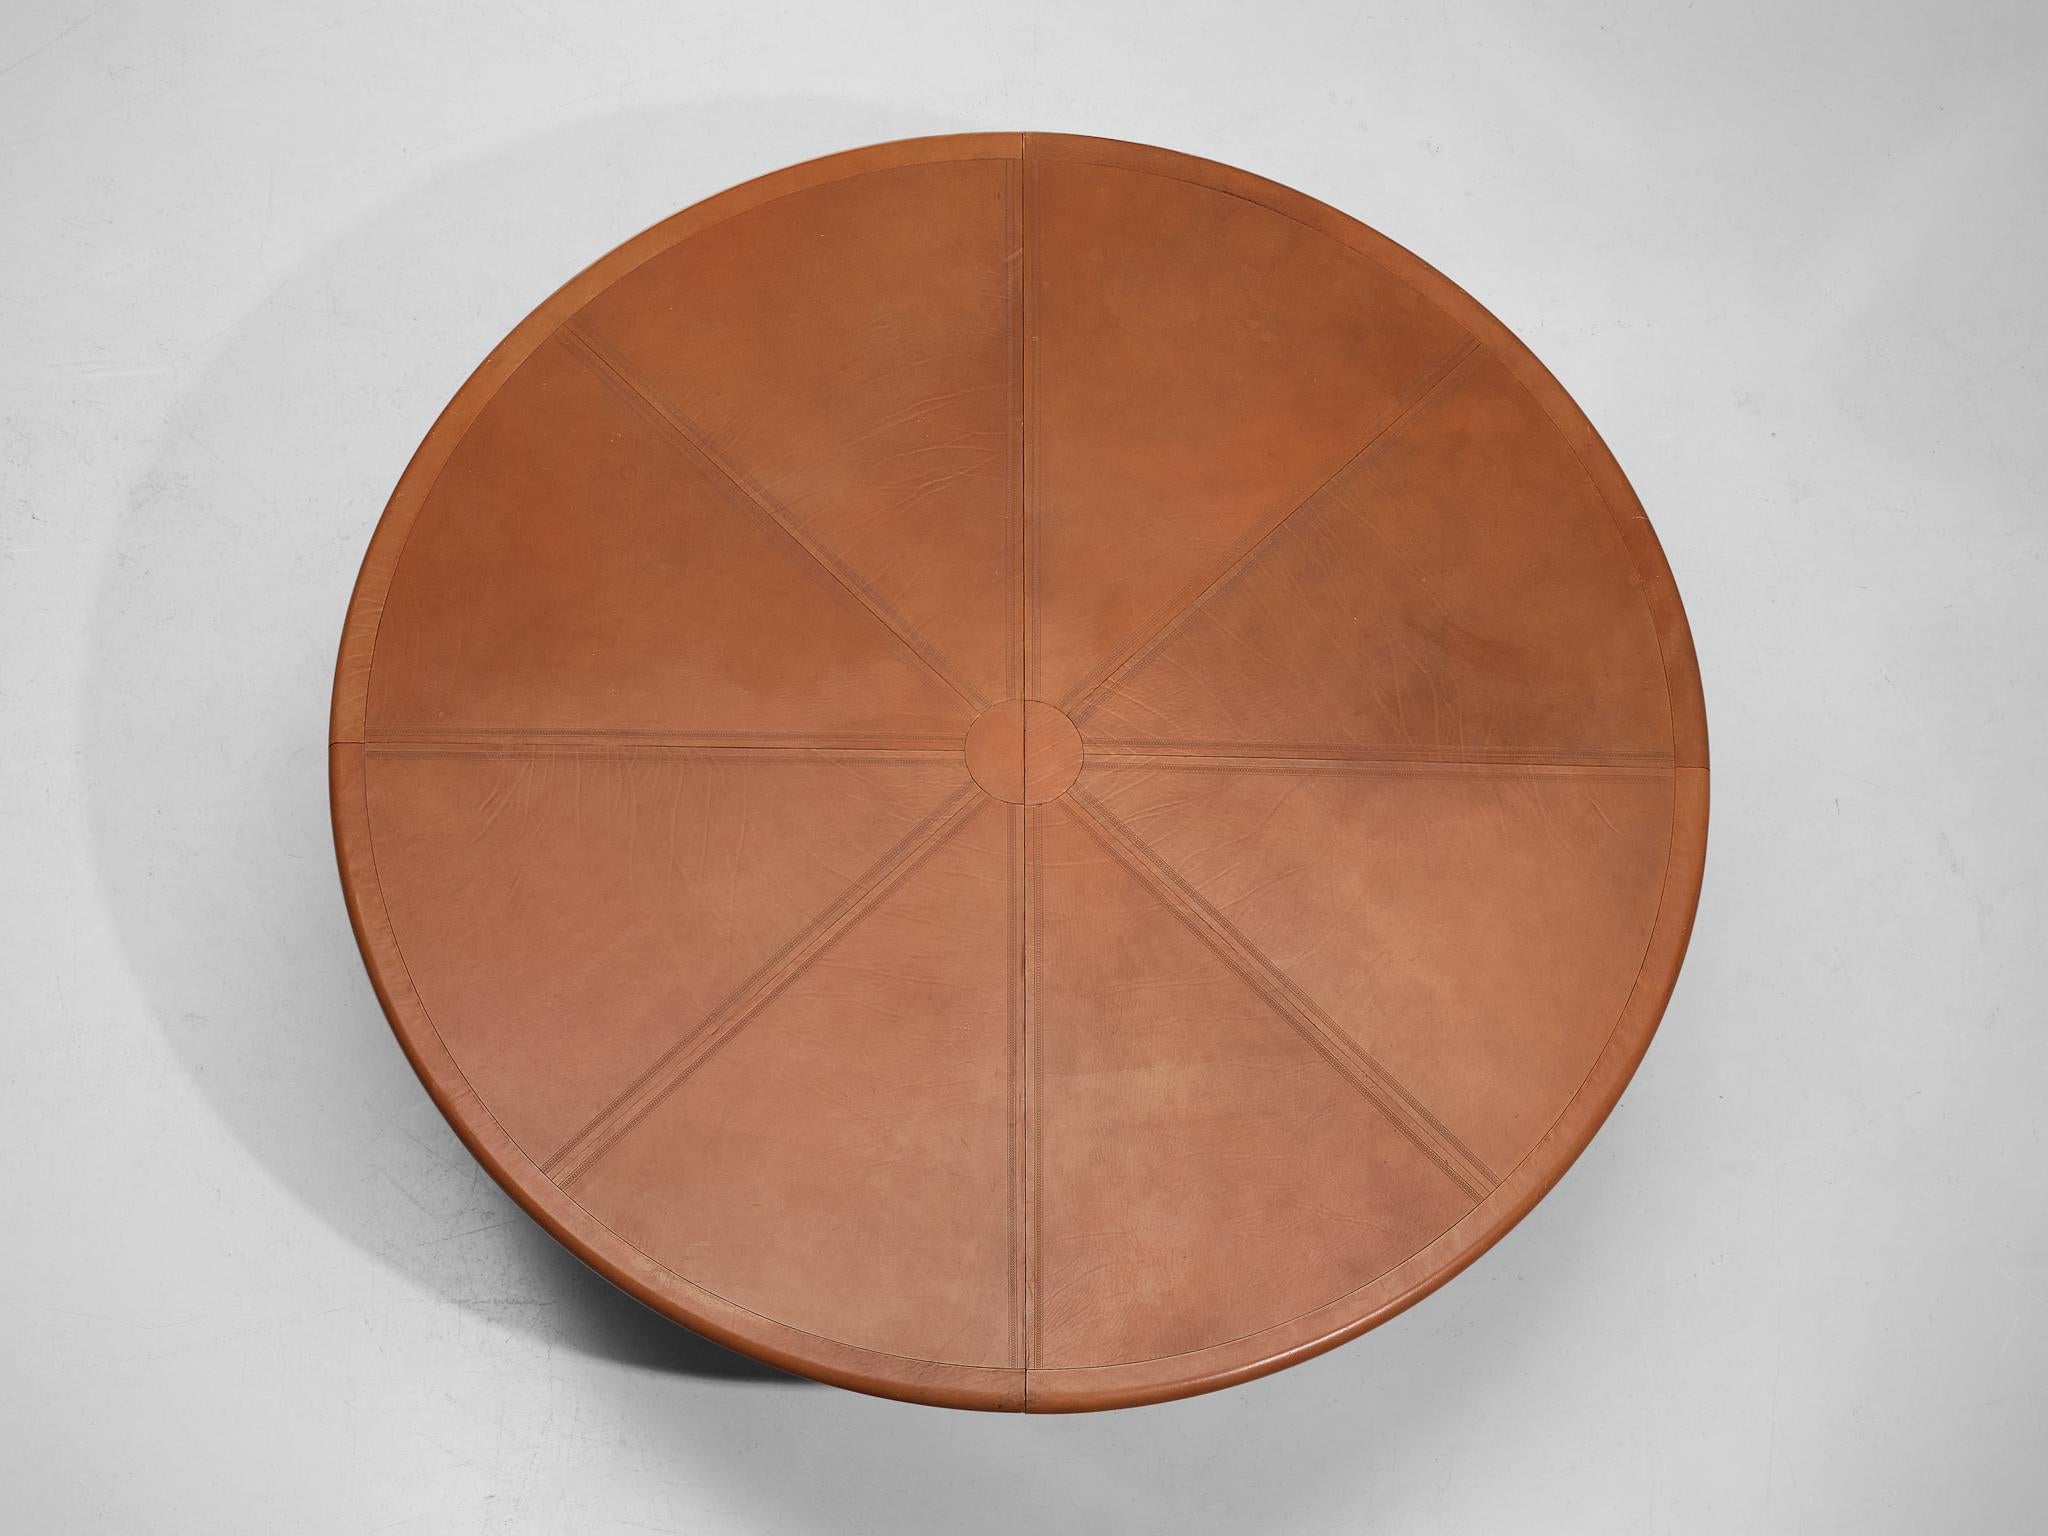 8 ft round table